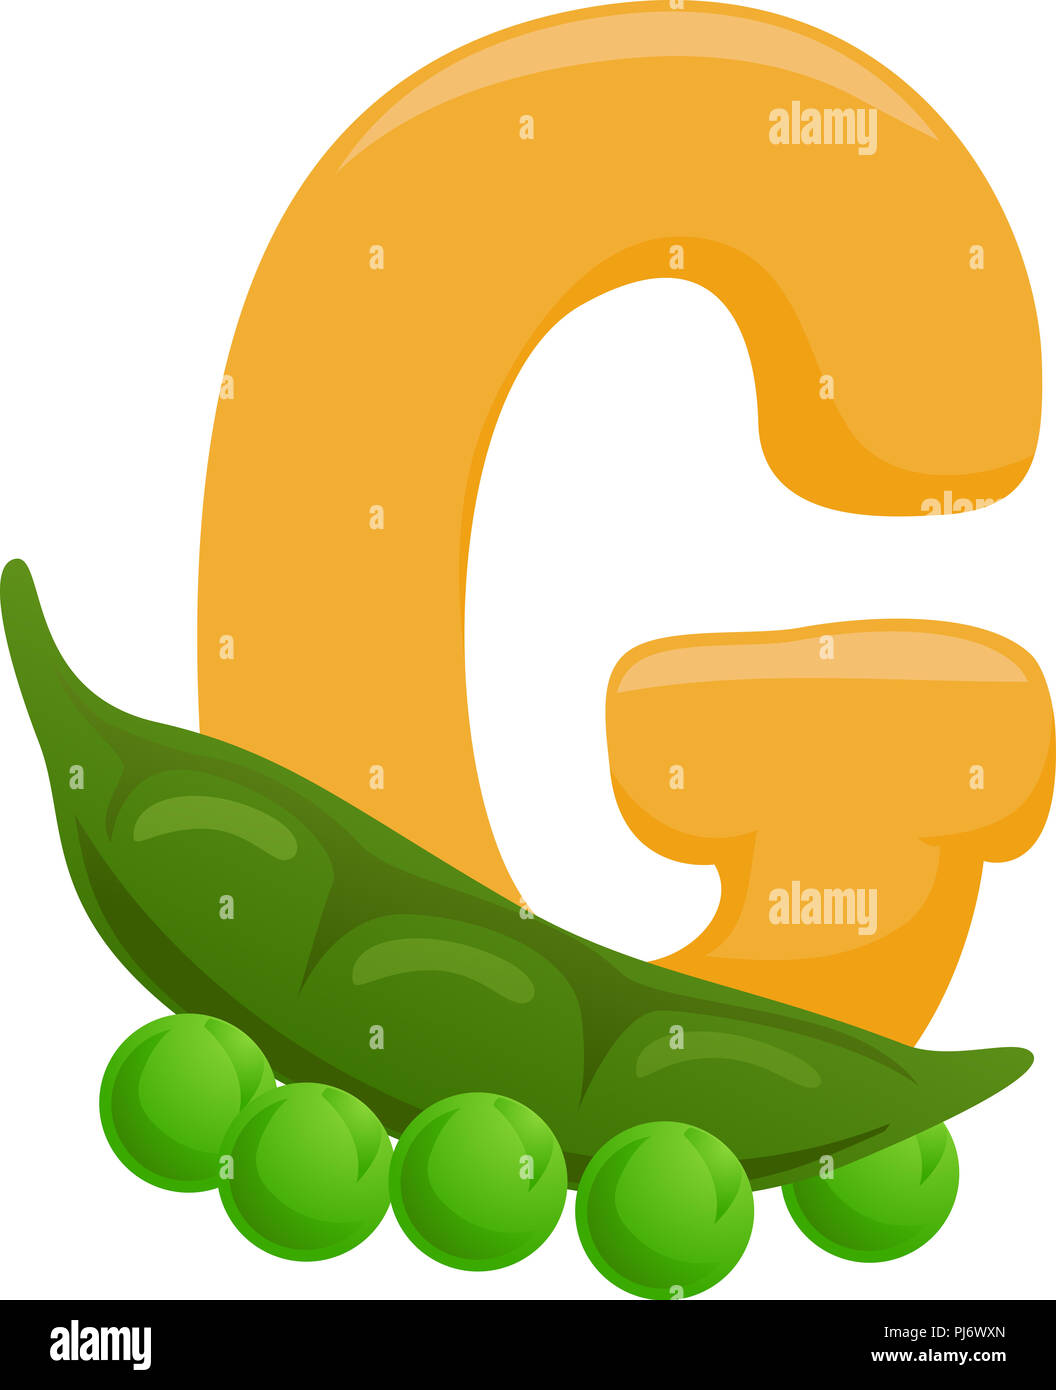 Illustration of Vegetables Alphabet, a Yellow Letter G and a Green Peas Stock Photo